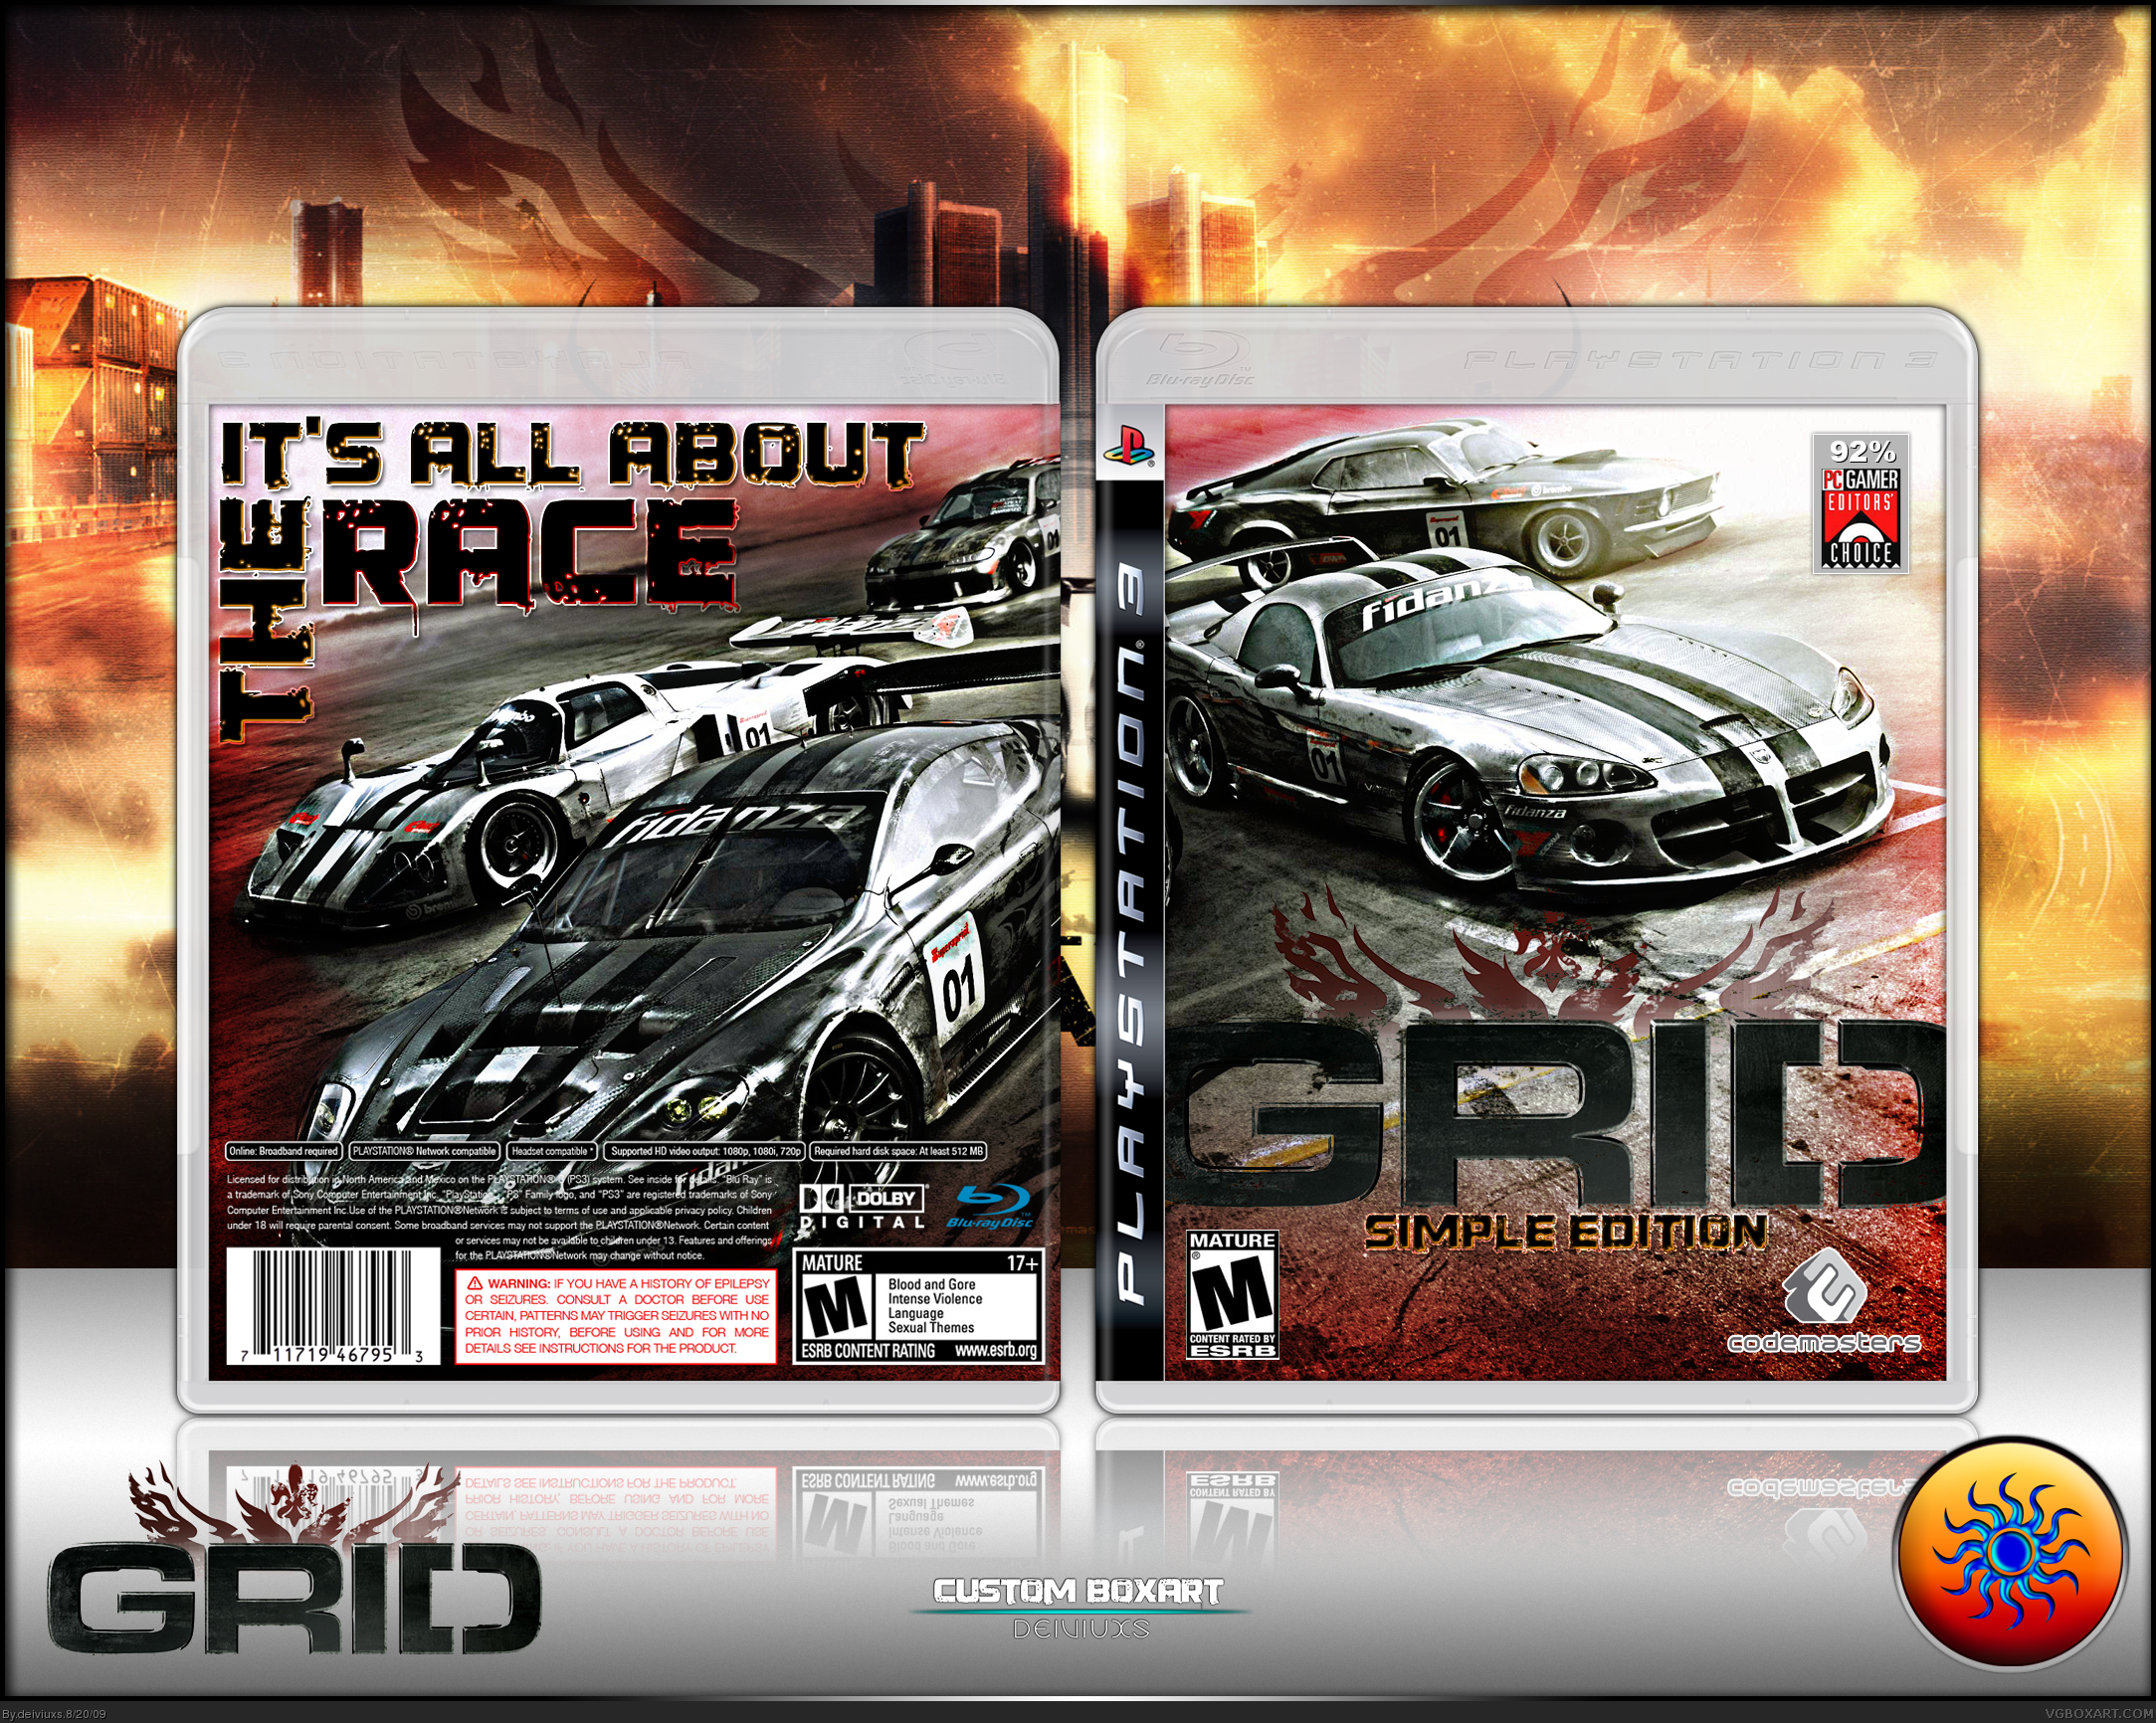 Race Driver: Grid box cover